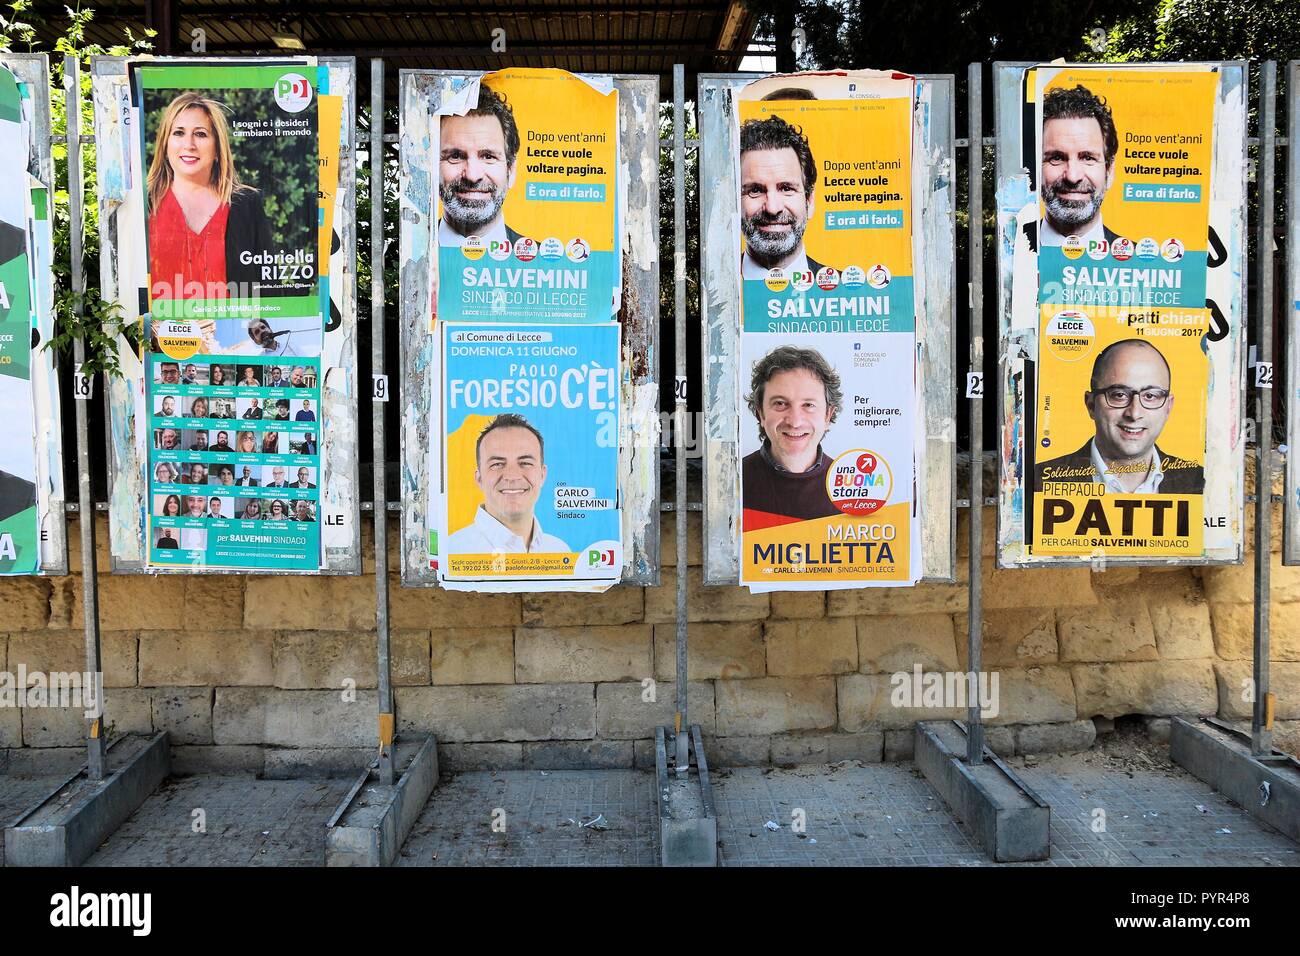 LECCE, ITALY - JUNE 1, 2017: Political candidates posters in Lecce, Italy. Lecce had its municipal elections in June 2017. Stock Photo